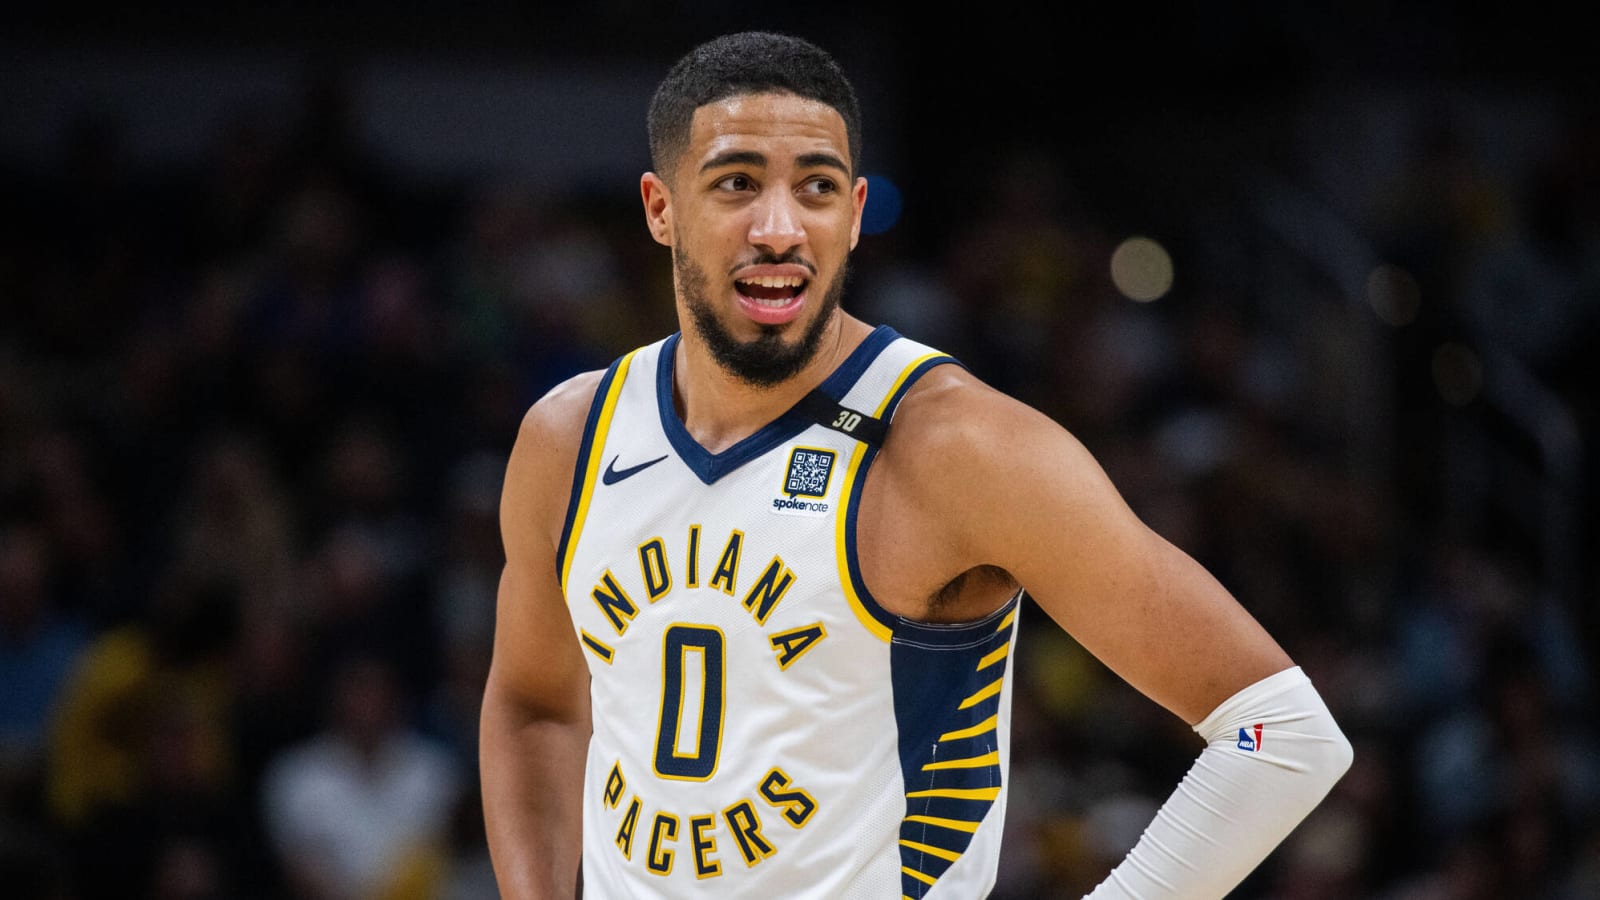 Indiana Pacers vs New York Knicks: Tyrese Haliburton is available Jalen Smith is out, final injury report, official starting lineups for February 10